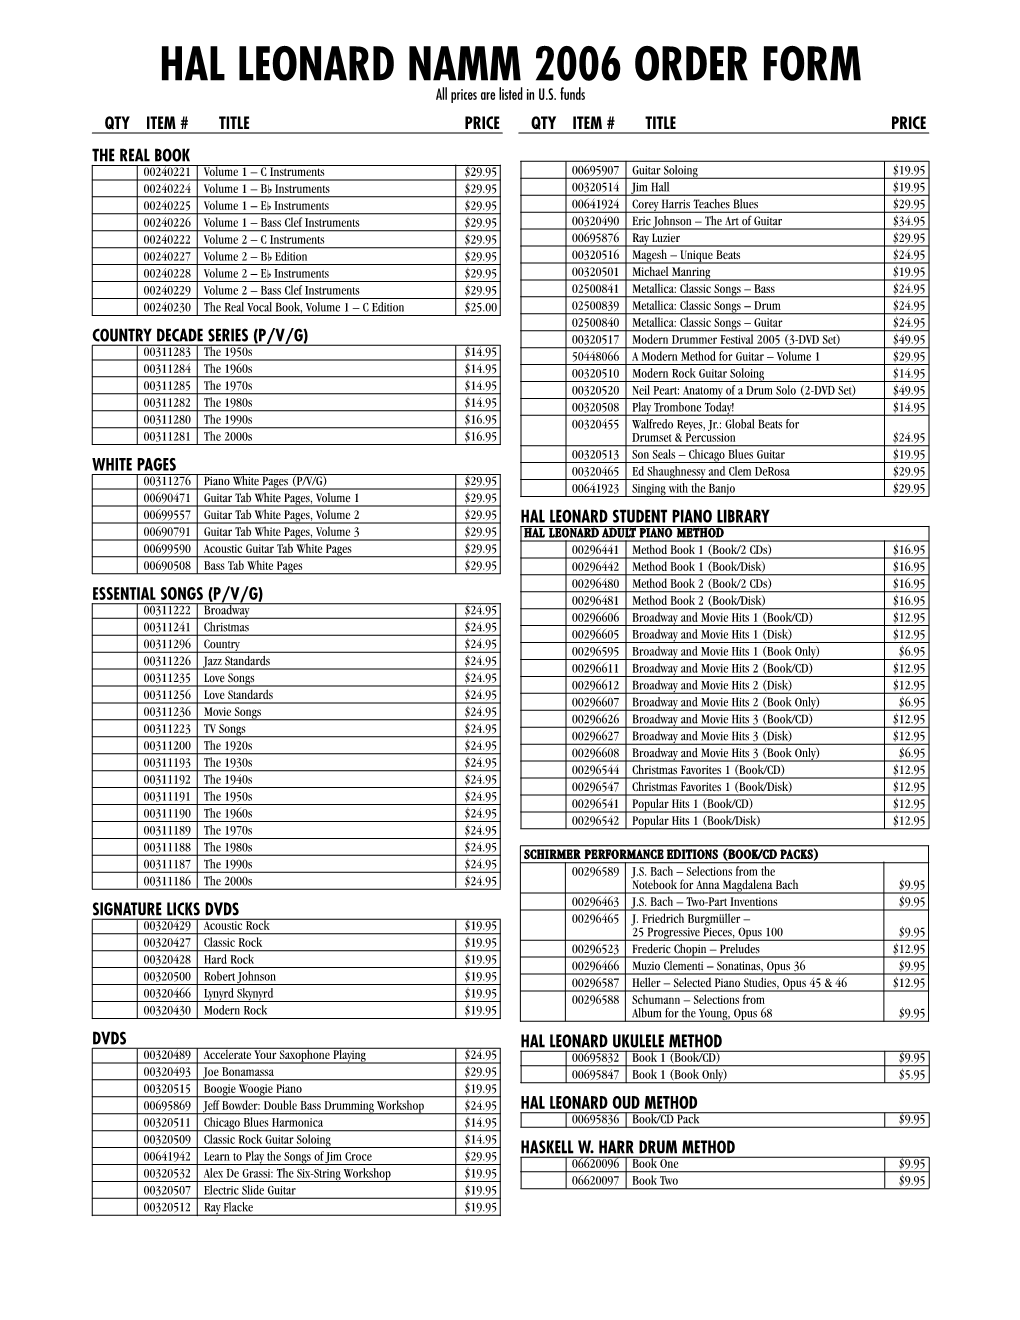 HAL LEONARD NAMM 2006 ORDER FORM All Prices Are Listed in U.S